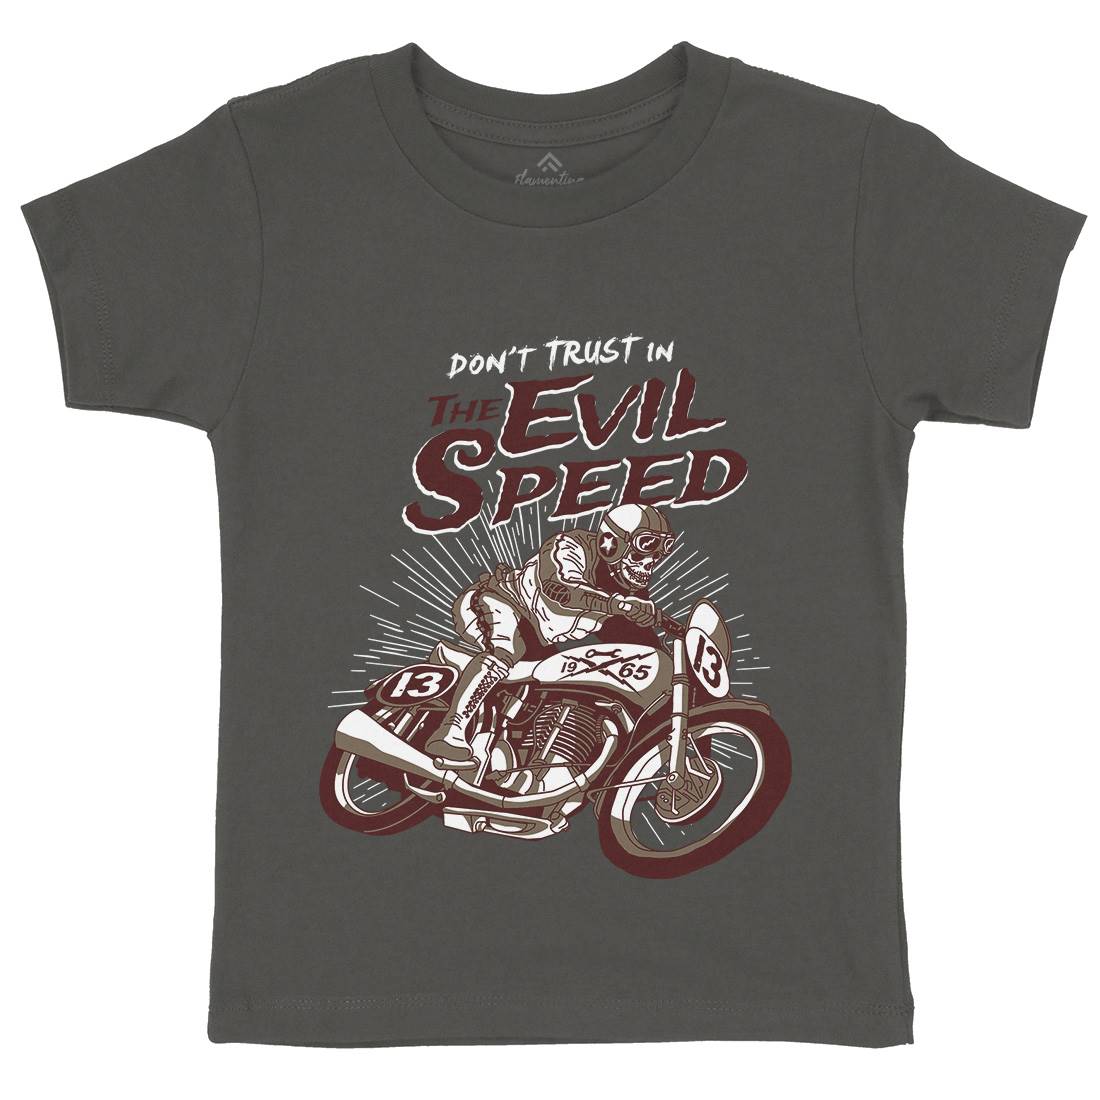 Evil Speed Kids Crew Neck T-Shirt Motorcycles A969